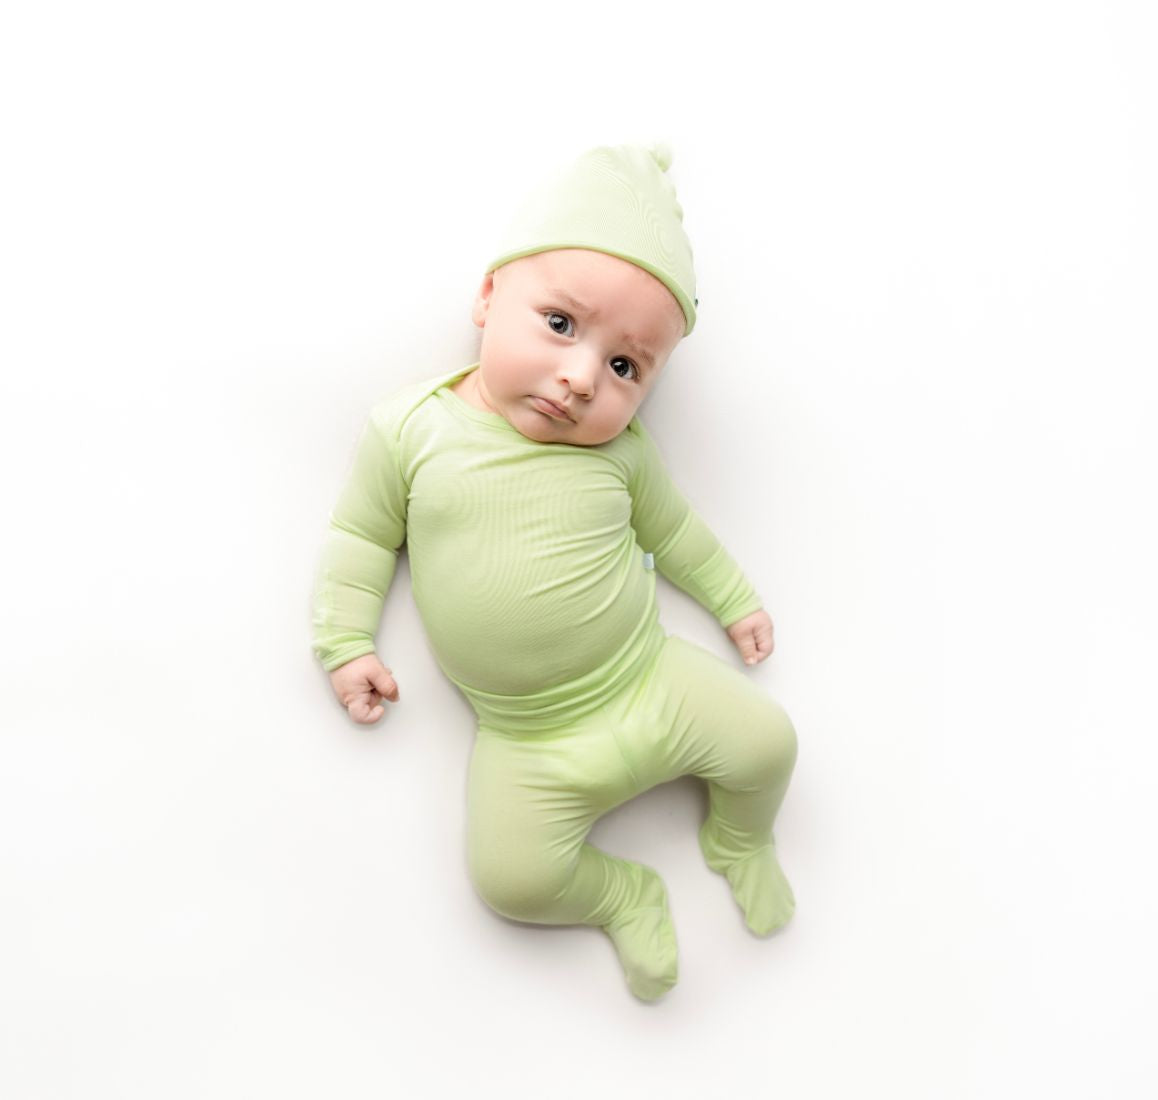 Baby boy wearing newborn Cuddle Sprouts outfit 